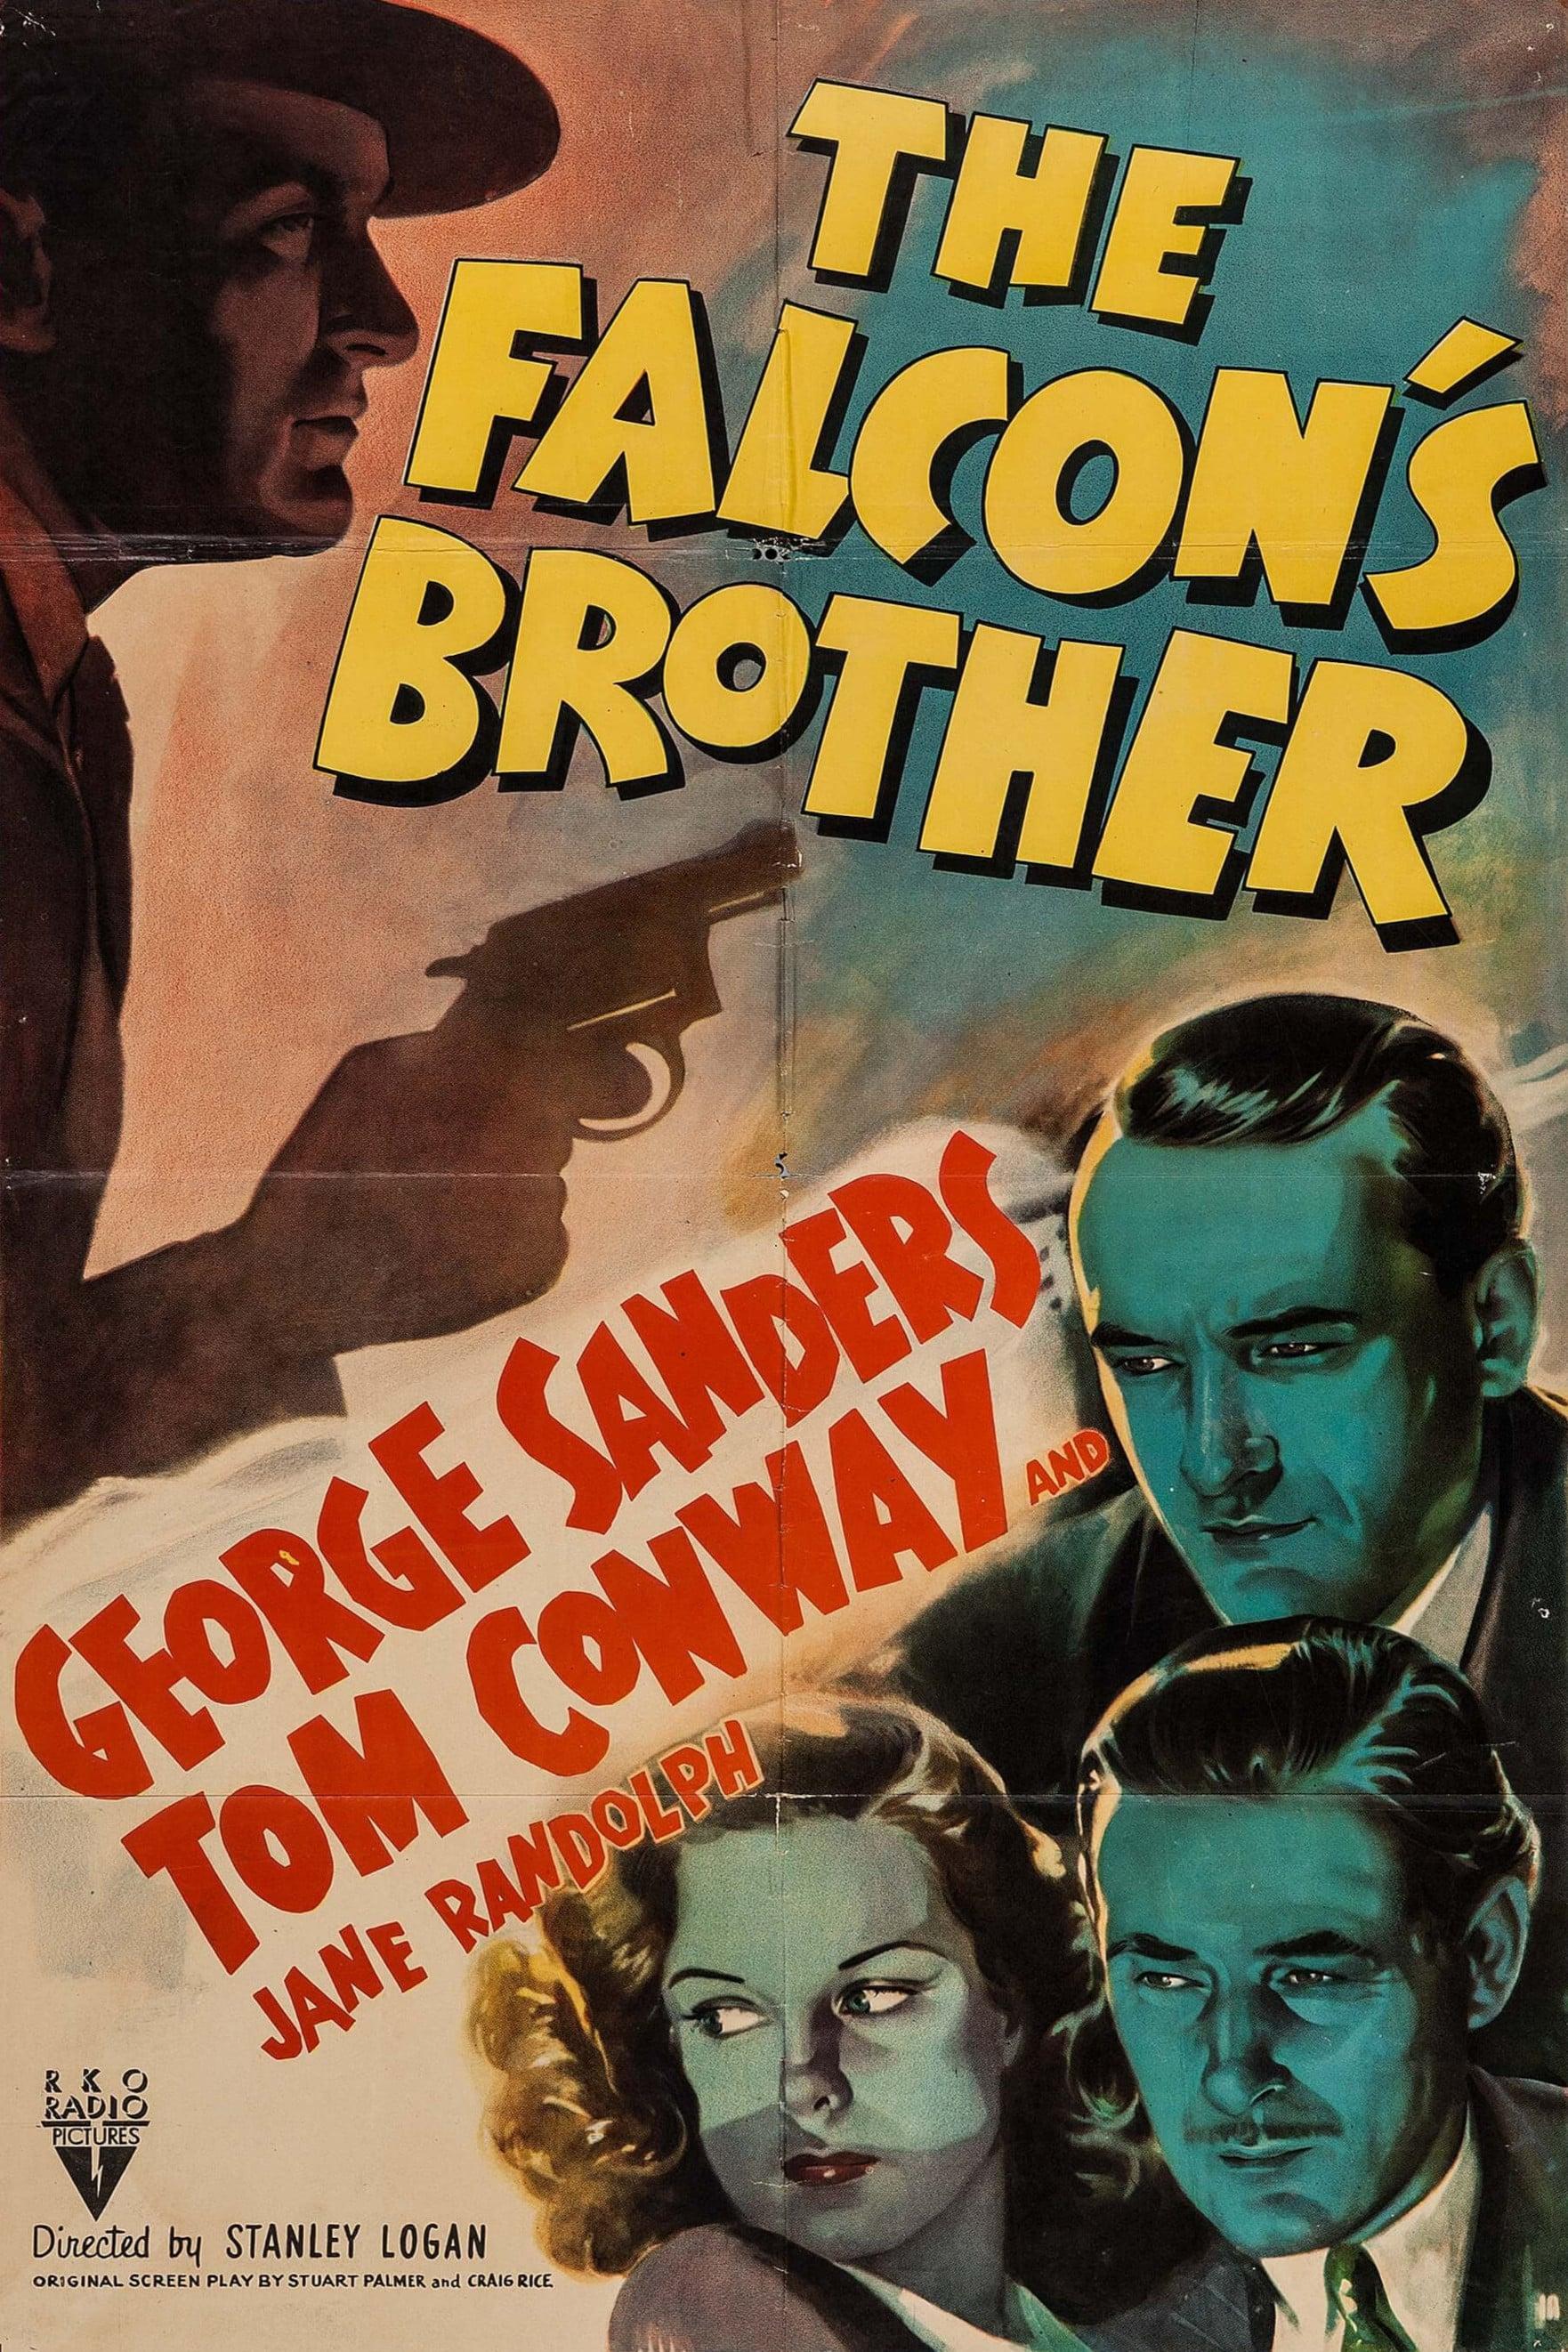 The Falcon's Brother poster